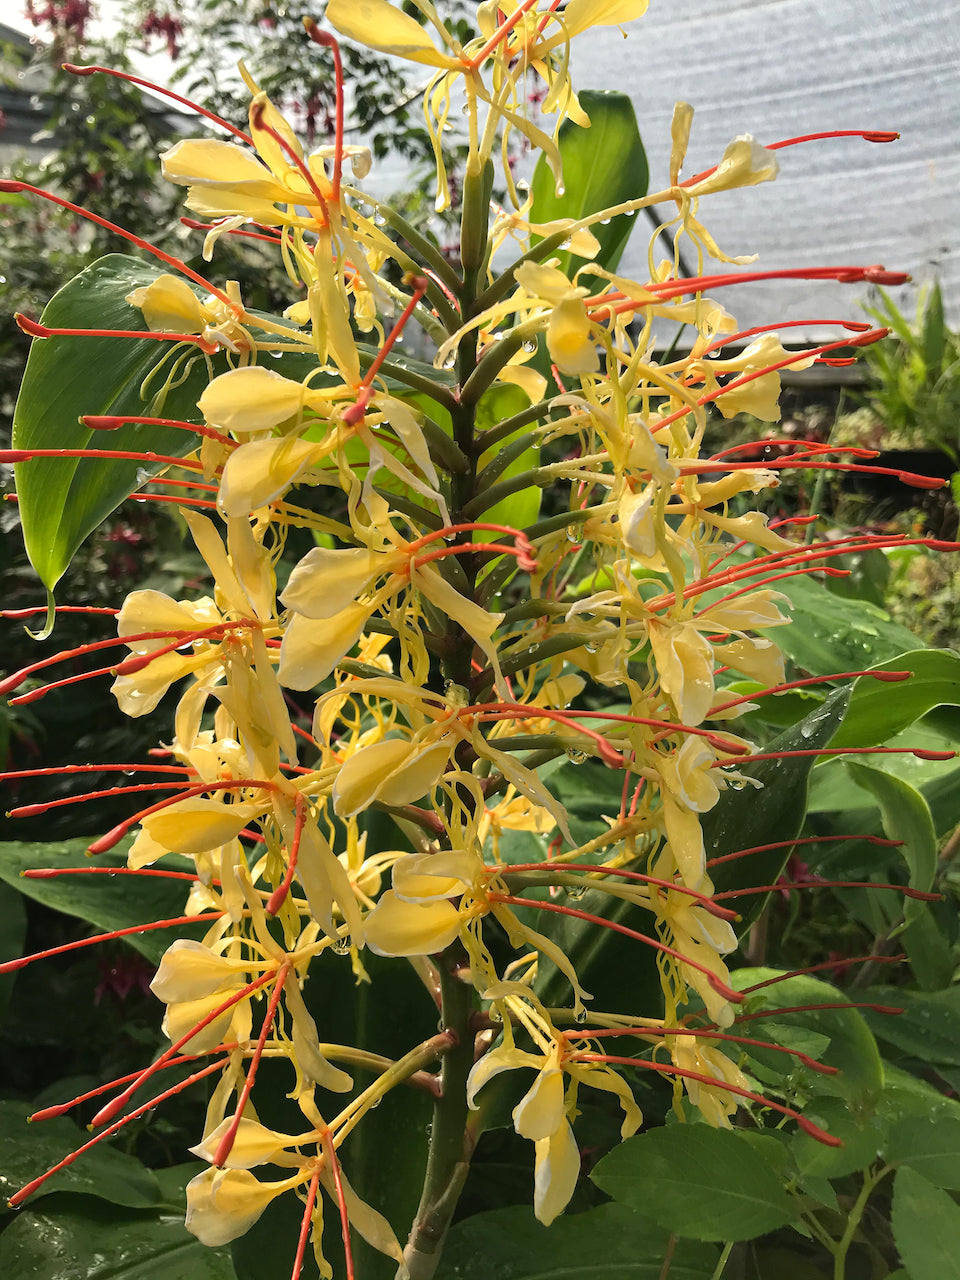 Hedychium Gardnerianum Kahili Ginger Lily Hardy Ginger Keeping It Green Nursery